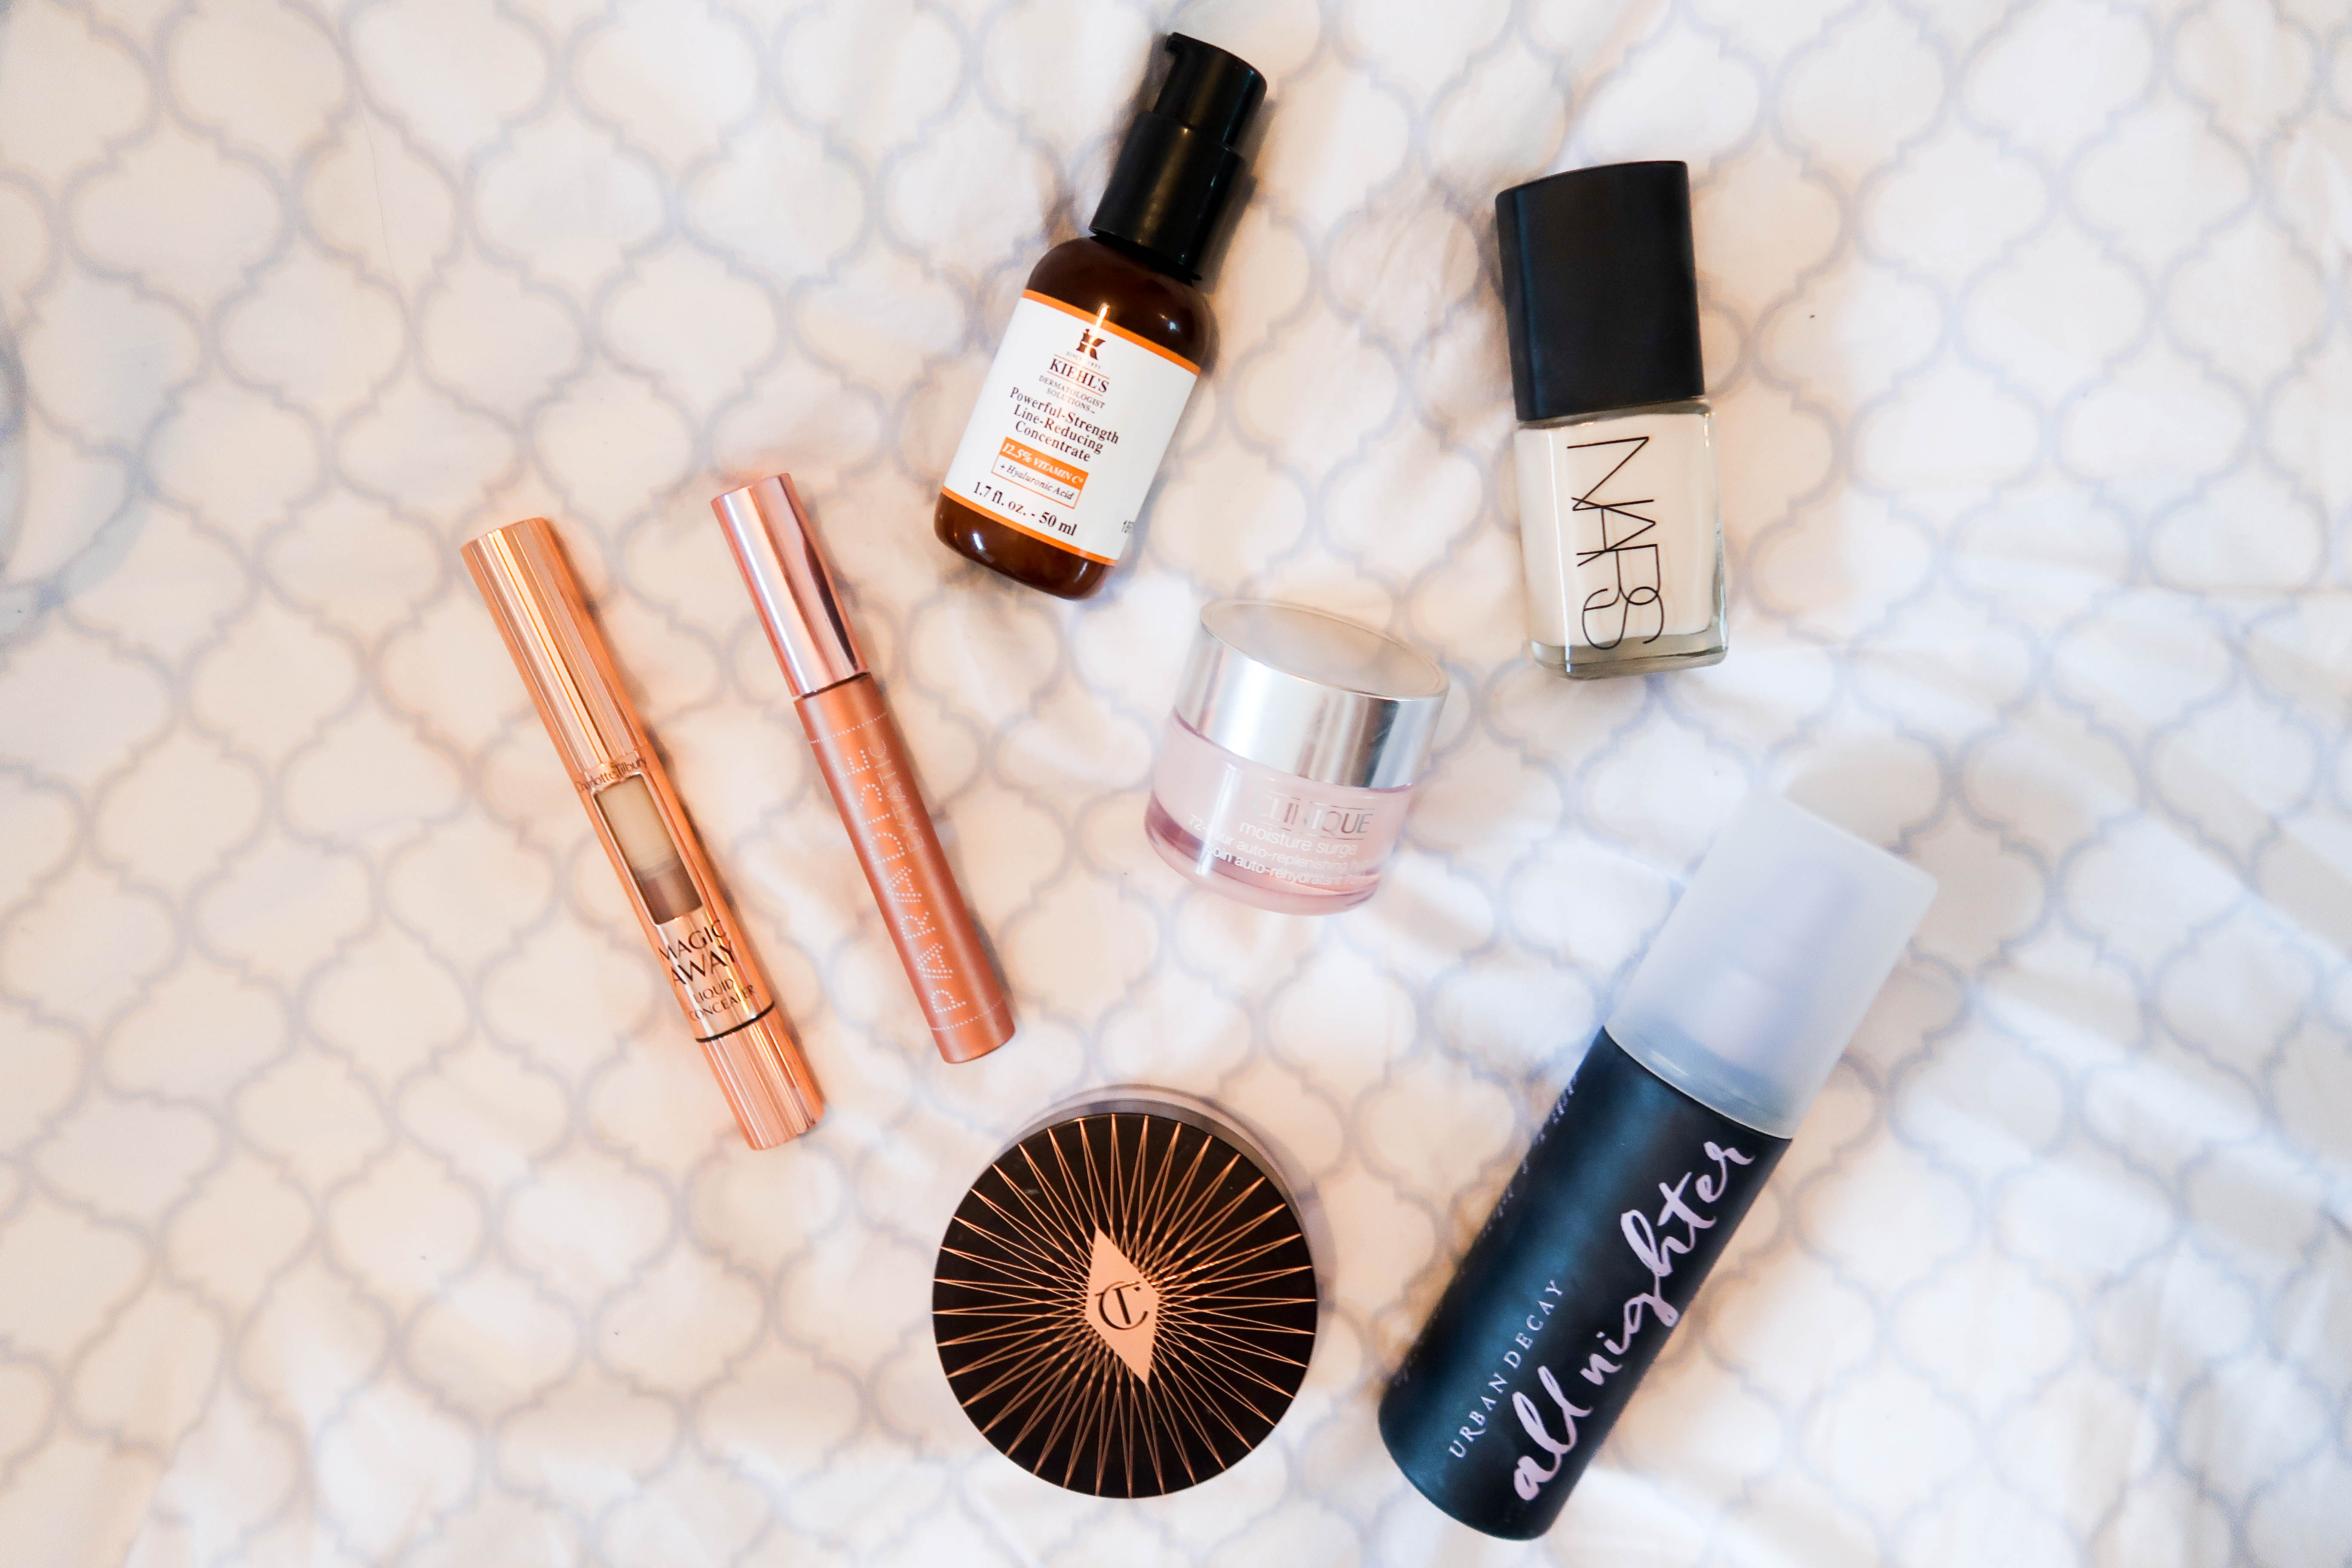 High End Beauty Products I’ve Been Loving Lately